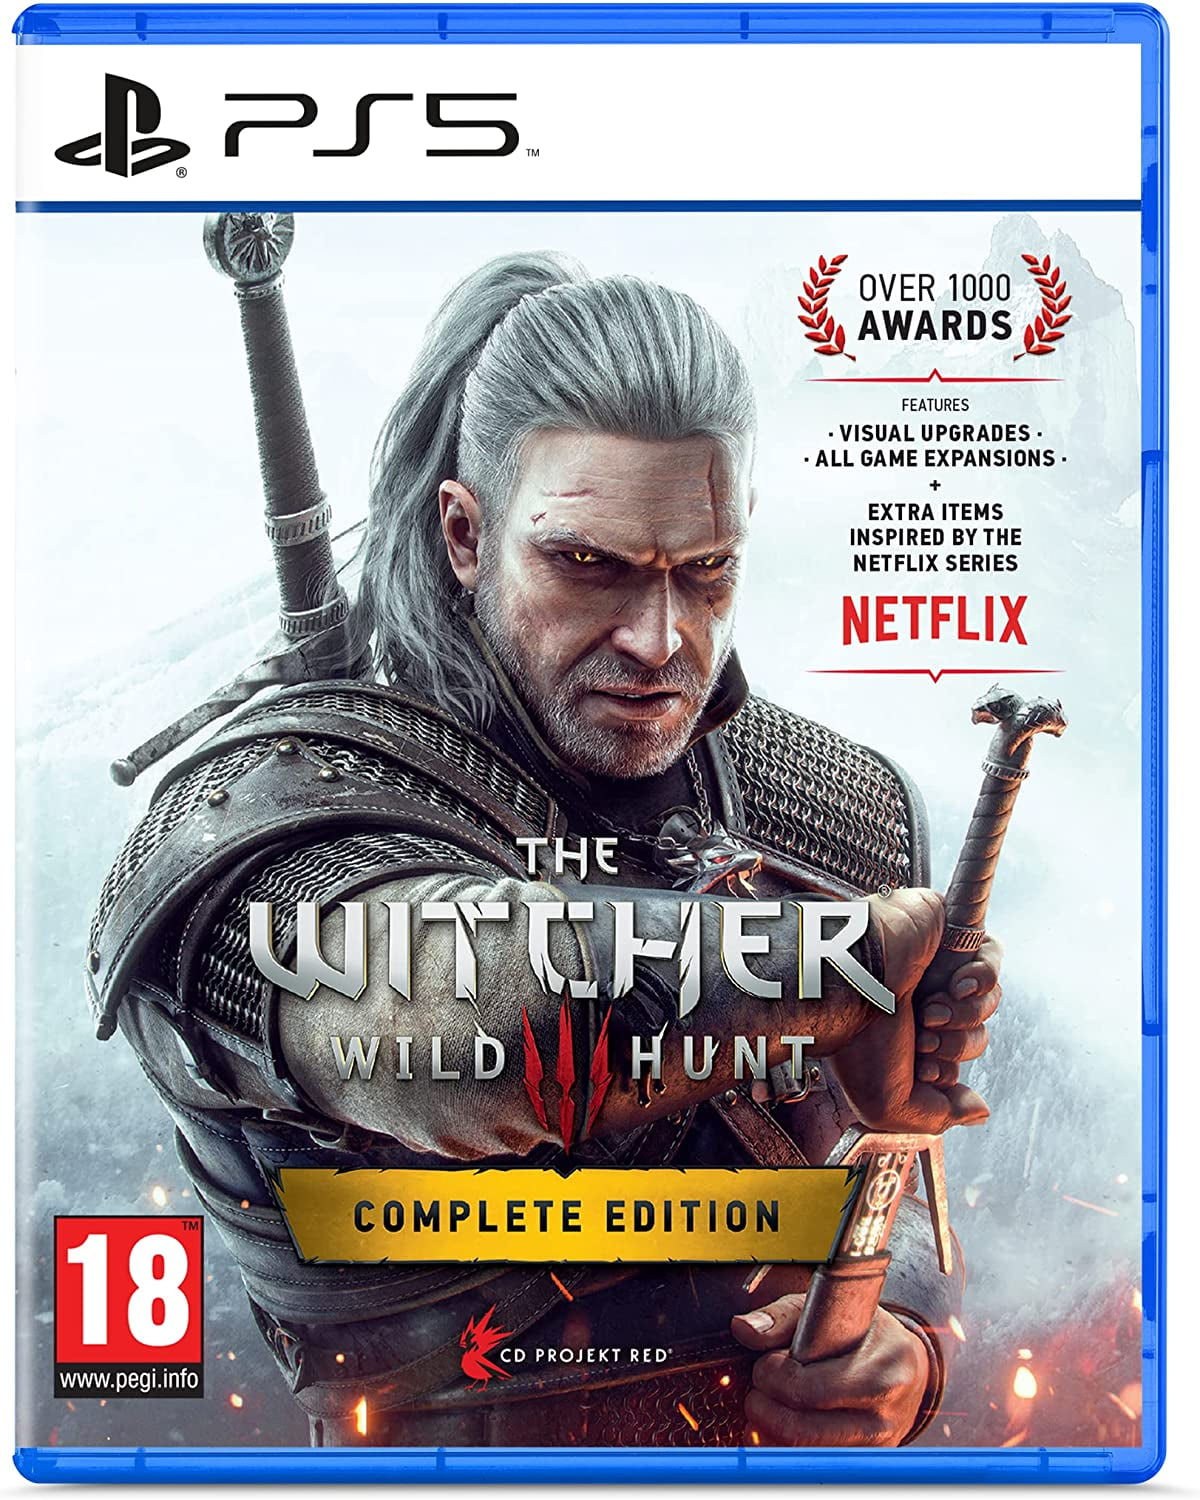 The Witcher 3: Wild Hunt Complete Edition Playstation 5 (PS5) EU Version  Region Free